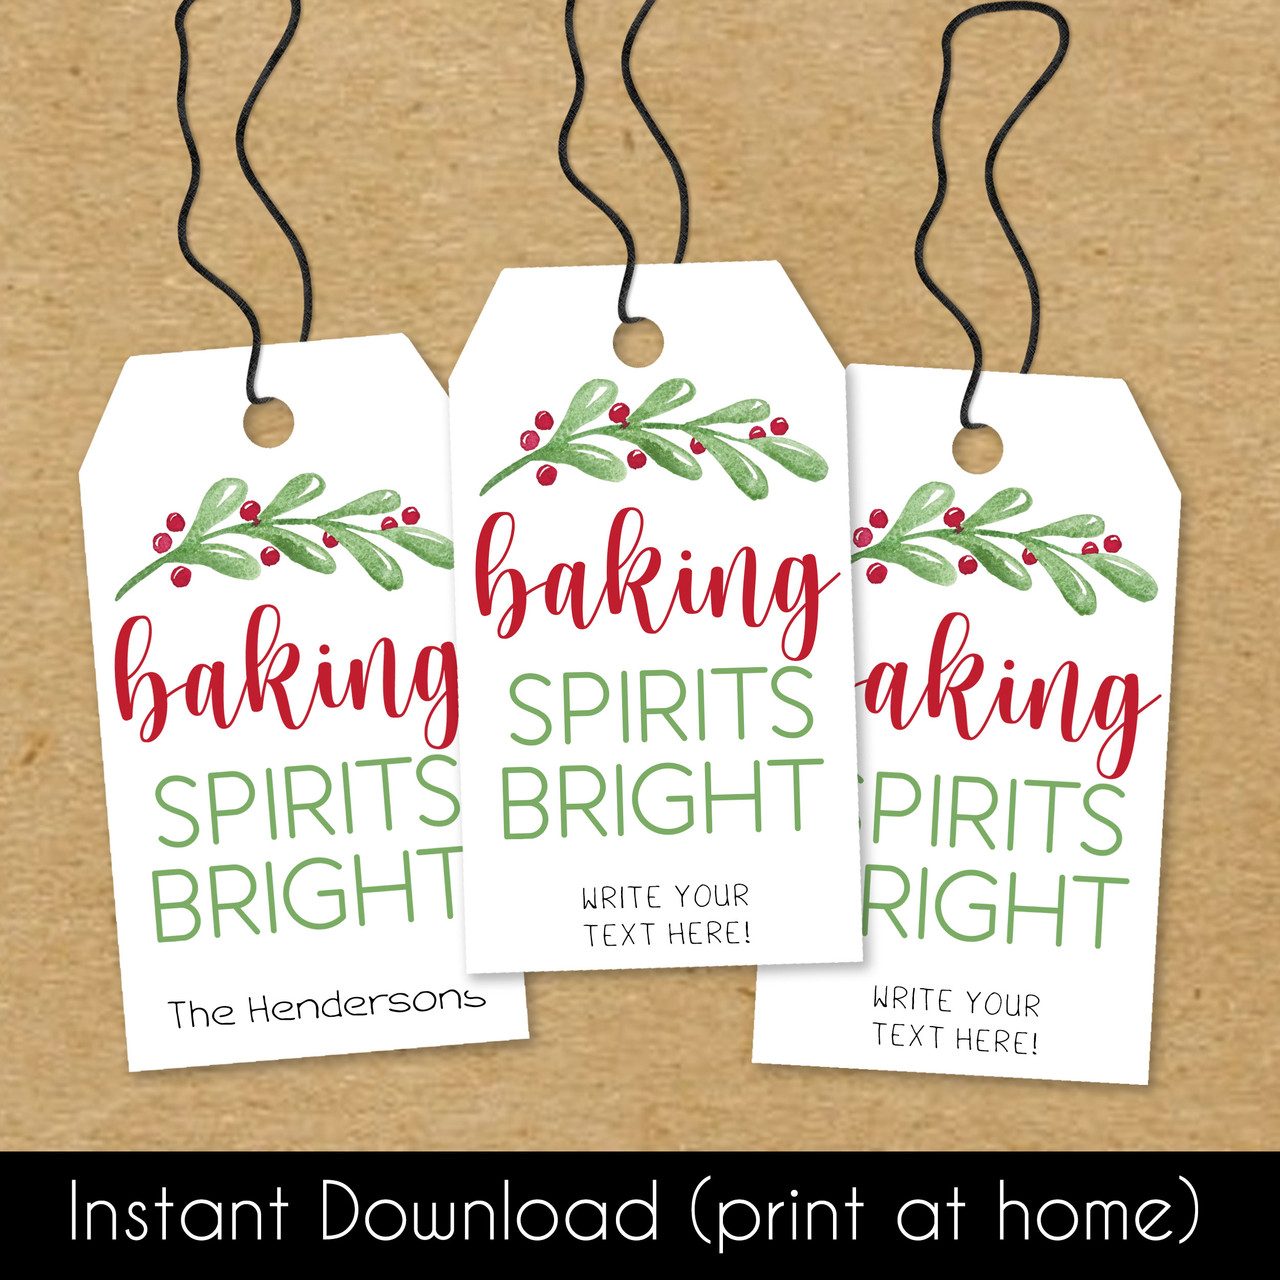 https://cdn11.bigcommerce.com/s-5grzuu6/images/stencil/1280x1280/products/5954/44222/Baking-Spirits-Bright-Printable_Download_Christmas_Gift_Tags__91067.1637612423.jpg?c=2